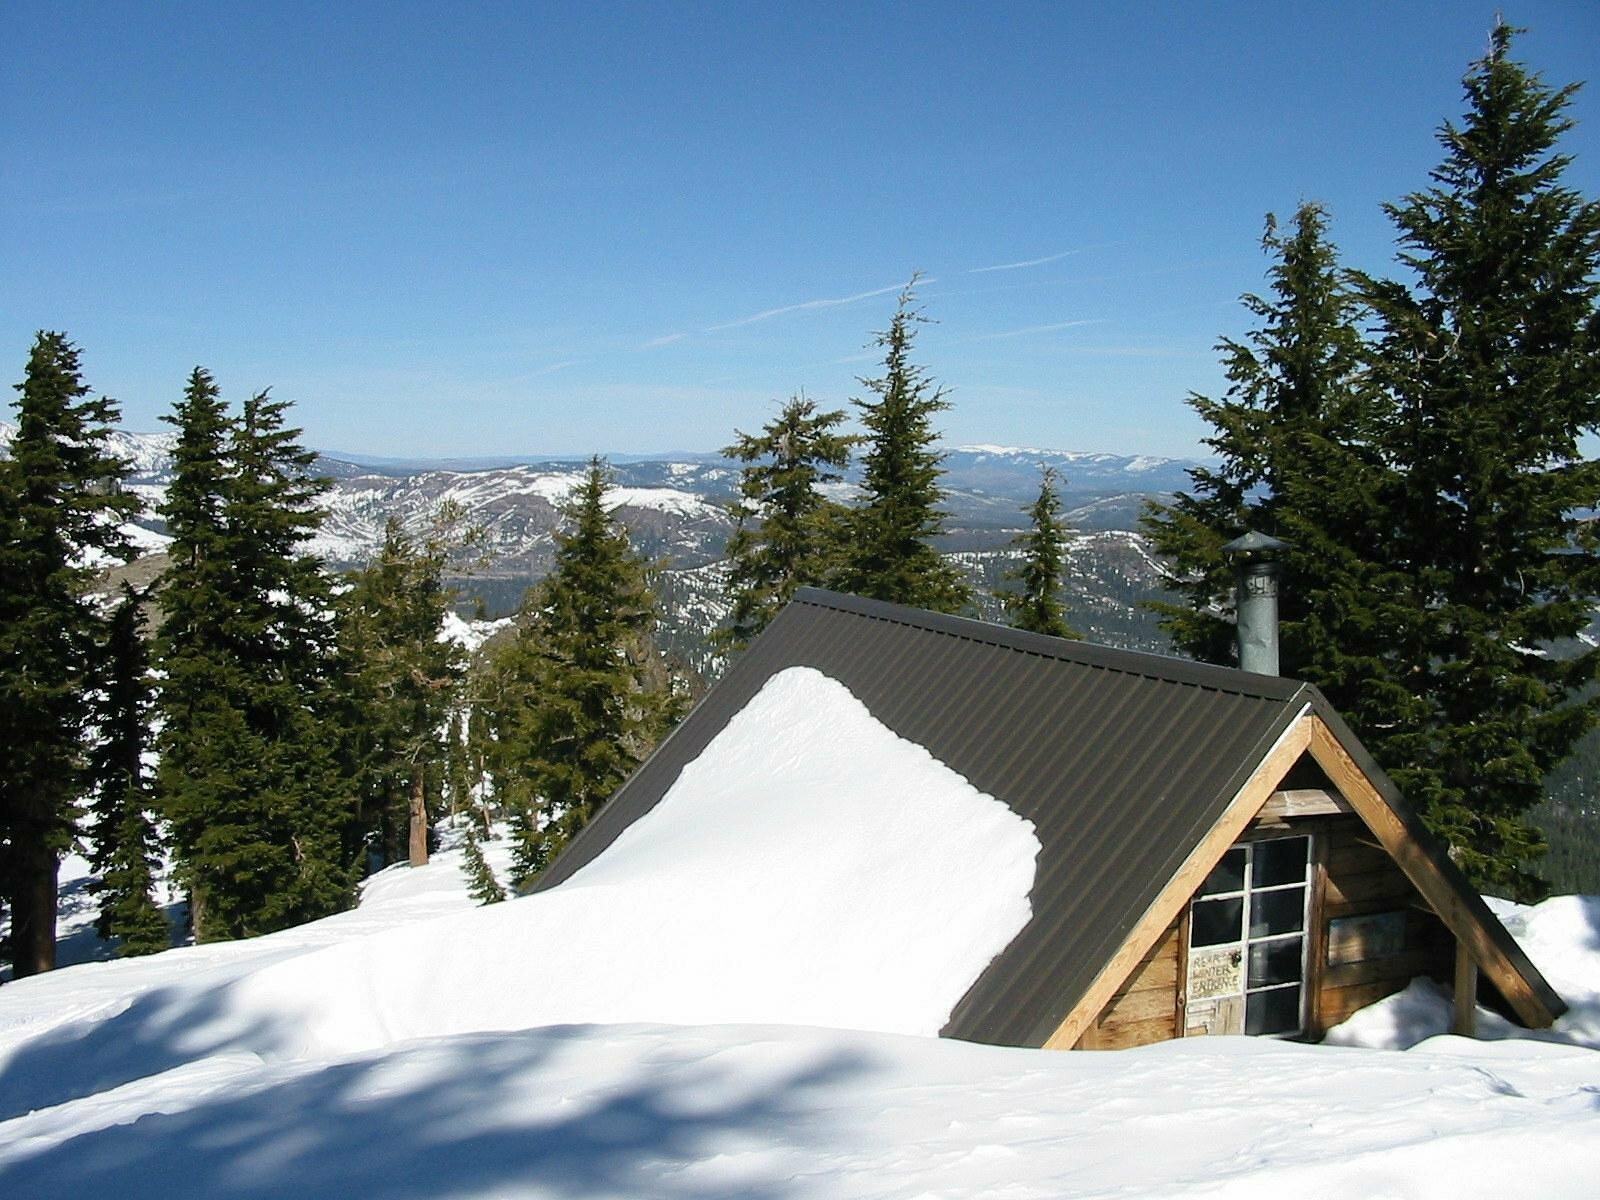 Photo of Clair Tappaan Lodge, Norden, CA